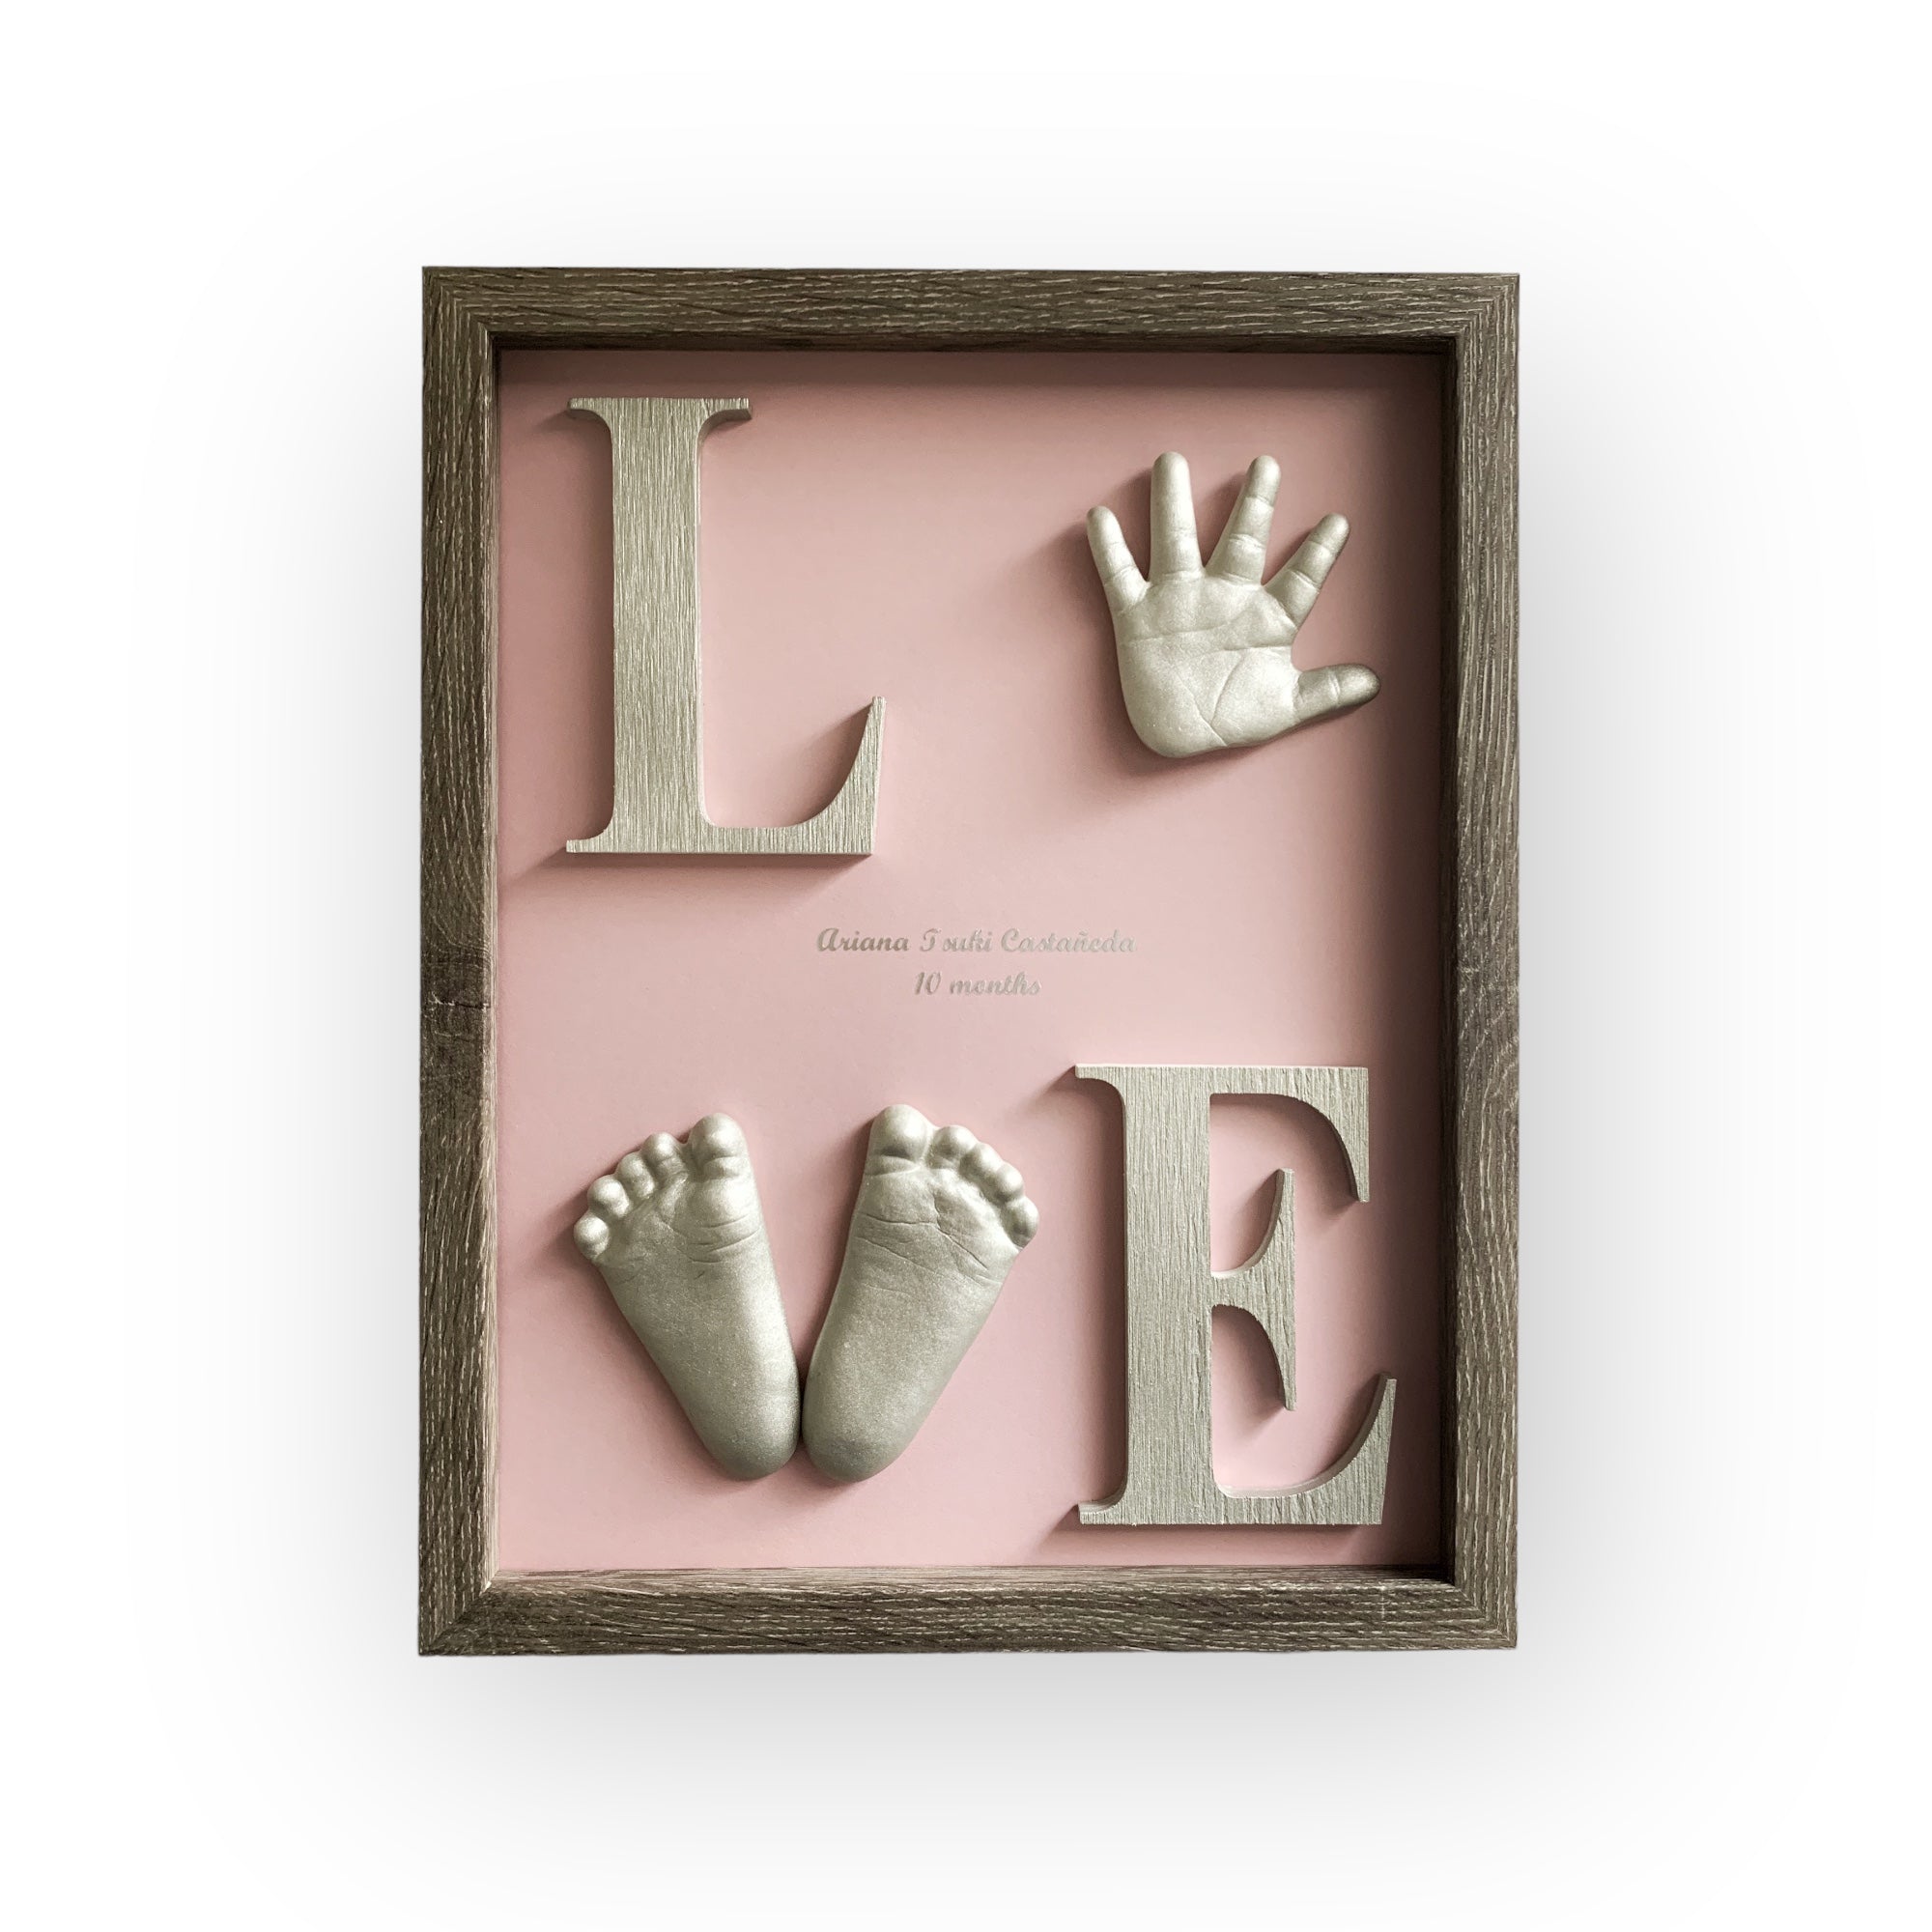 Life Casting for babies and families - Cast A Memory